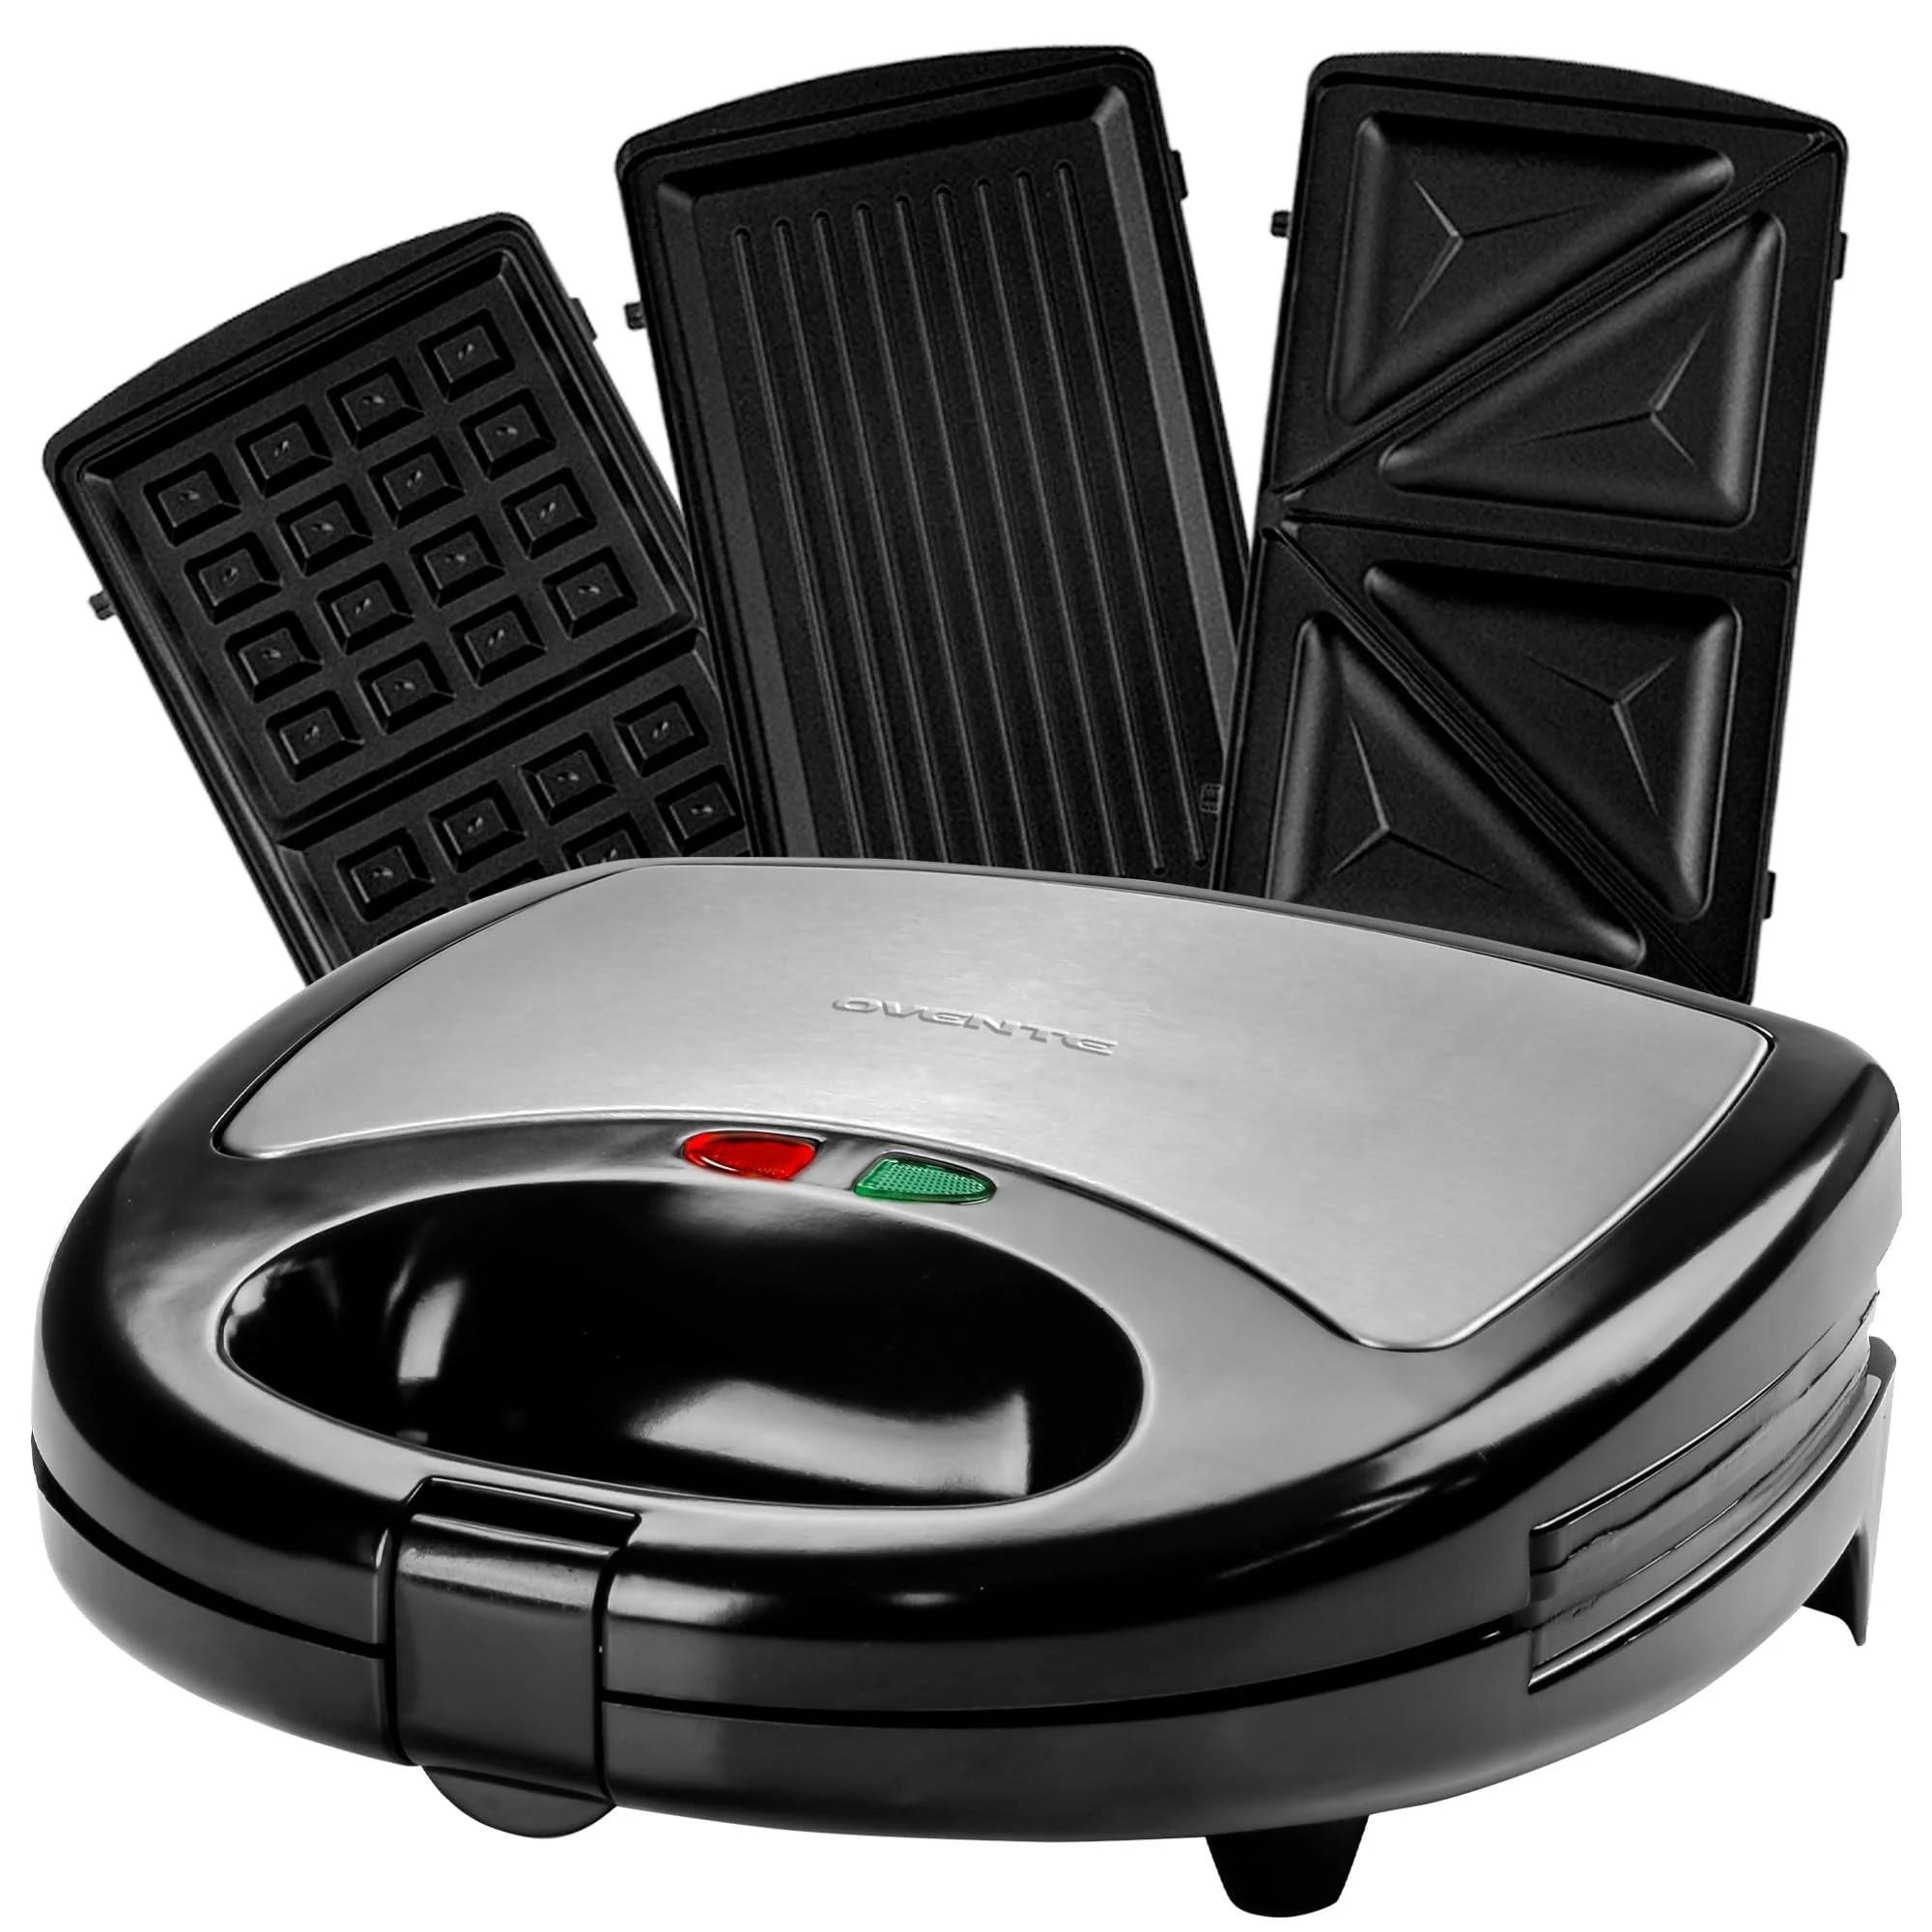 Ovente 3-in-1 Panini Maker with Waffle and Grill Plates | Image